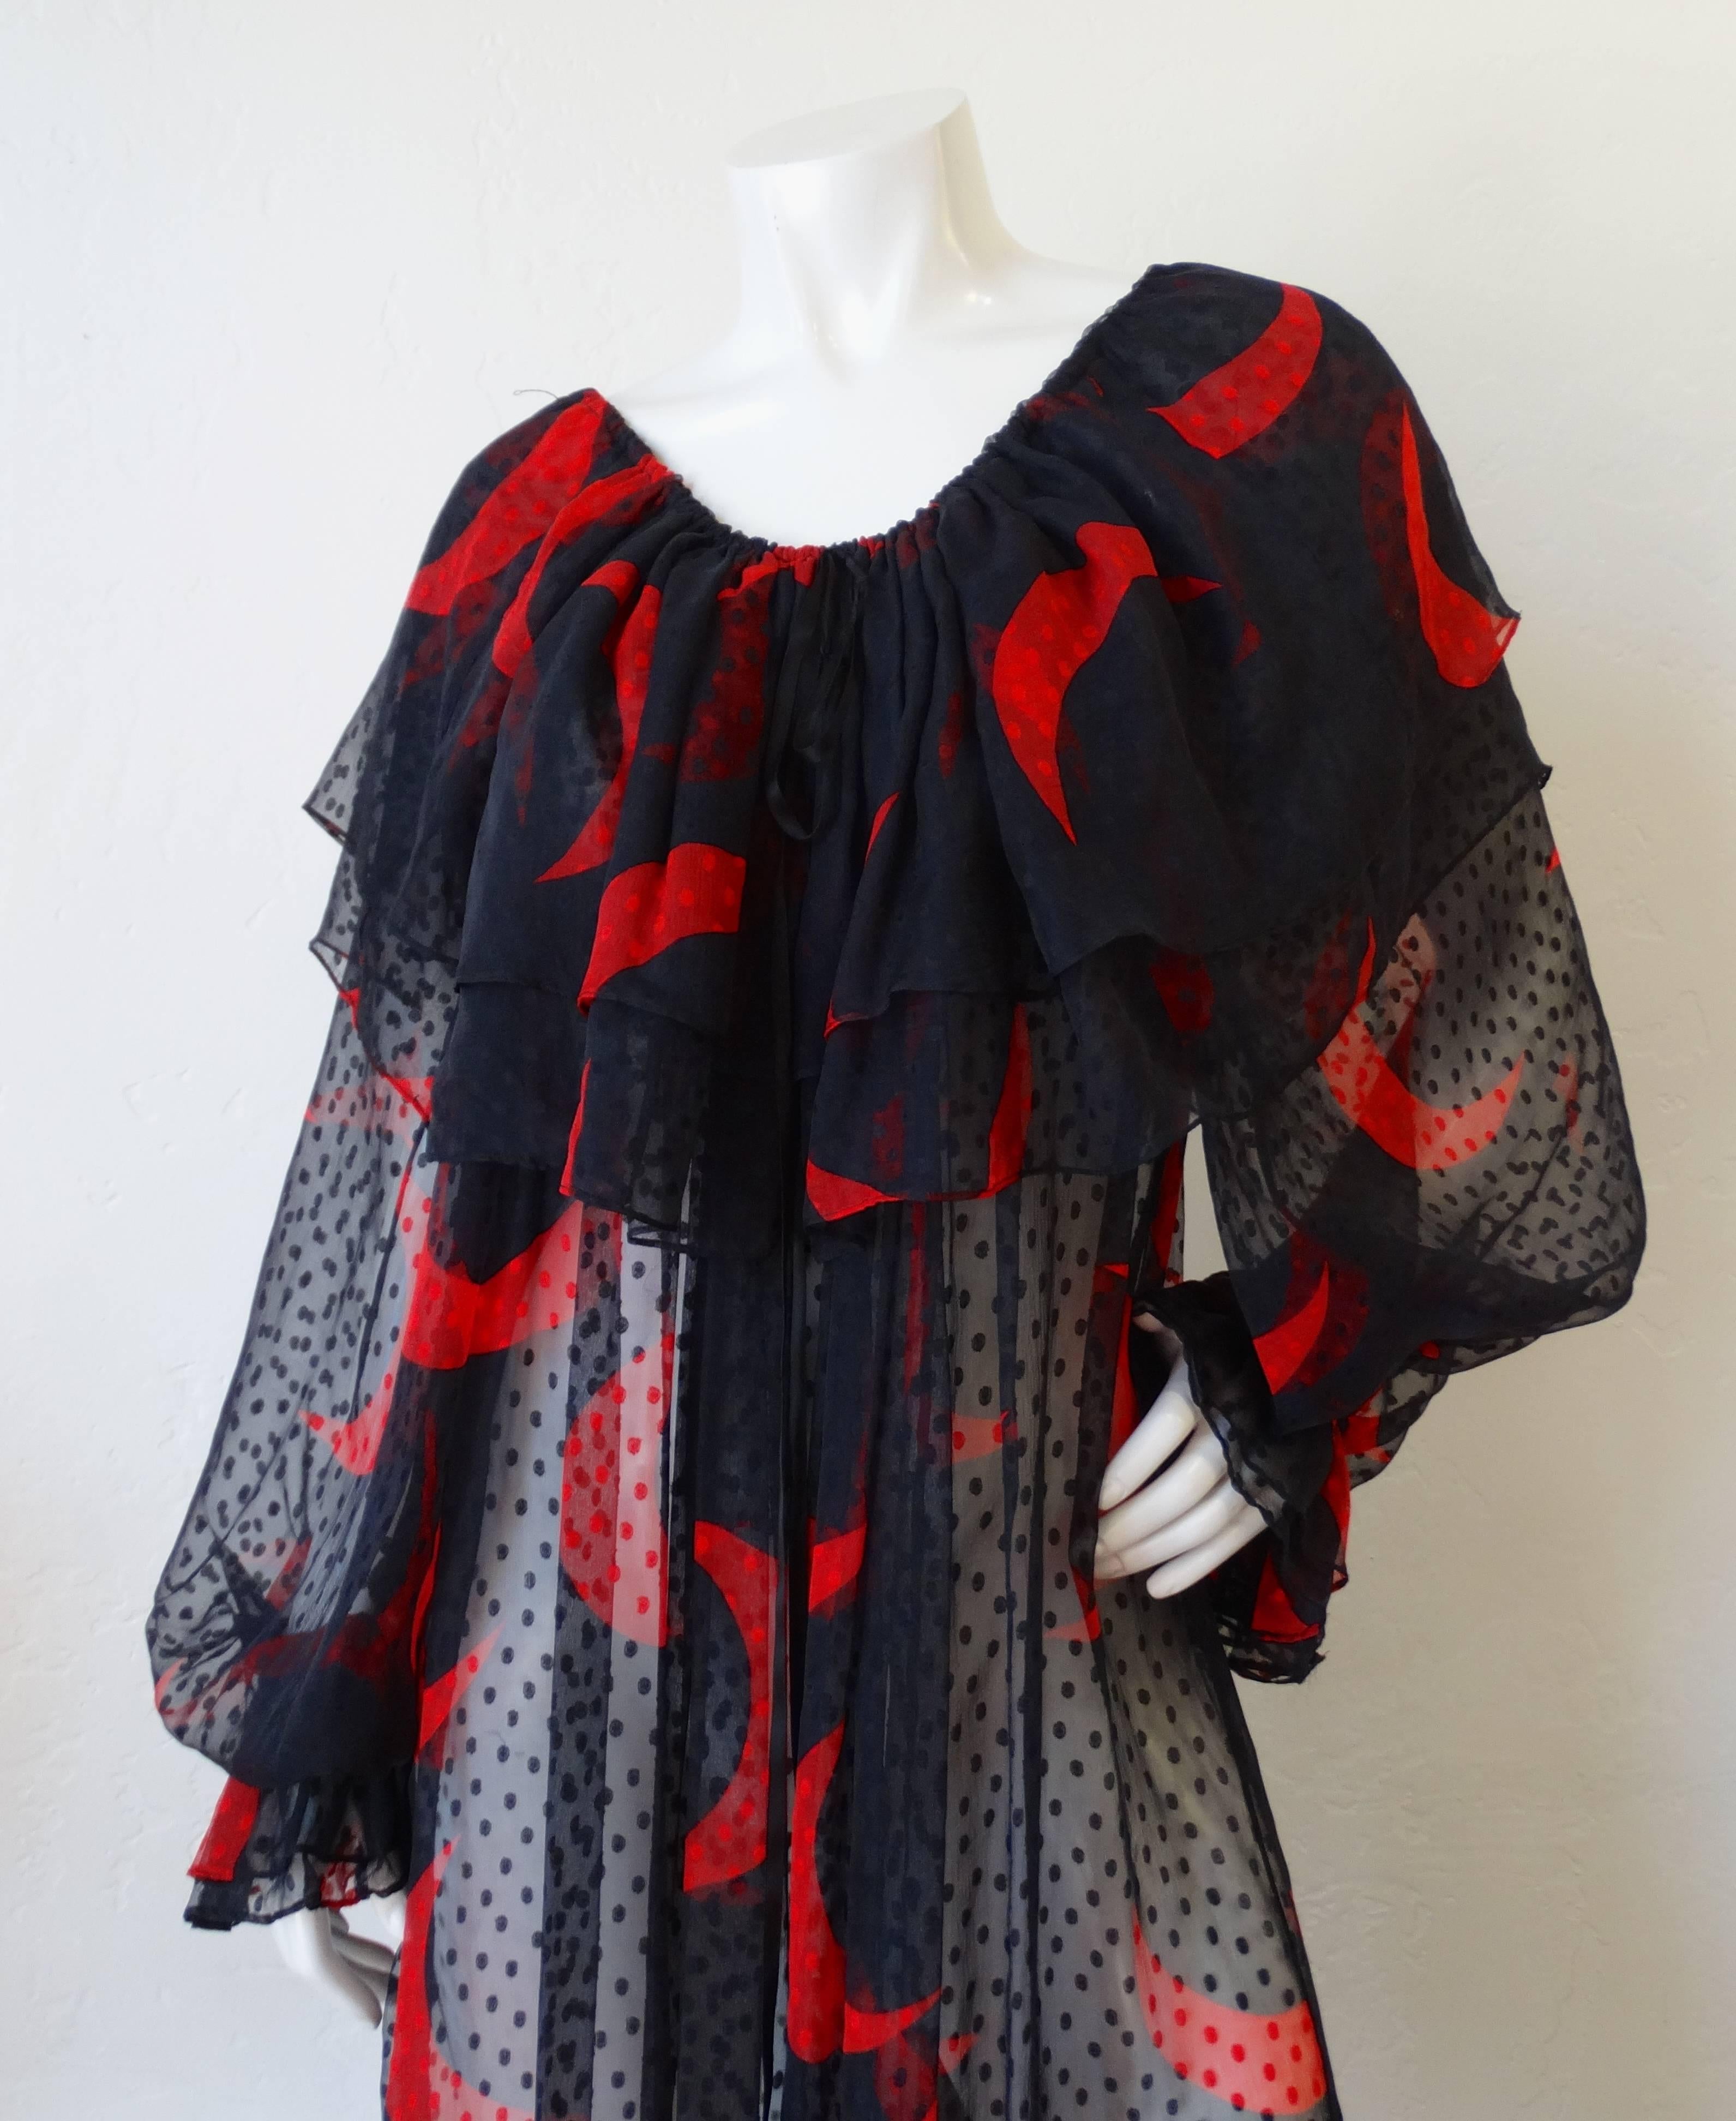 We are over the moon about this piece! This piece is by the prolific designer Saint Laurent- made in 1978! Loose, dreamy peasant style fit dress with billowing sleeves and off the shoulder fit. Ruffled, layered neckline with ruffle cinched cuffs to